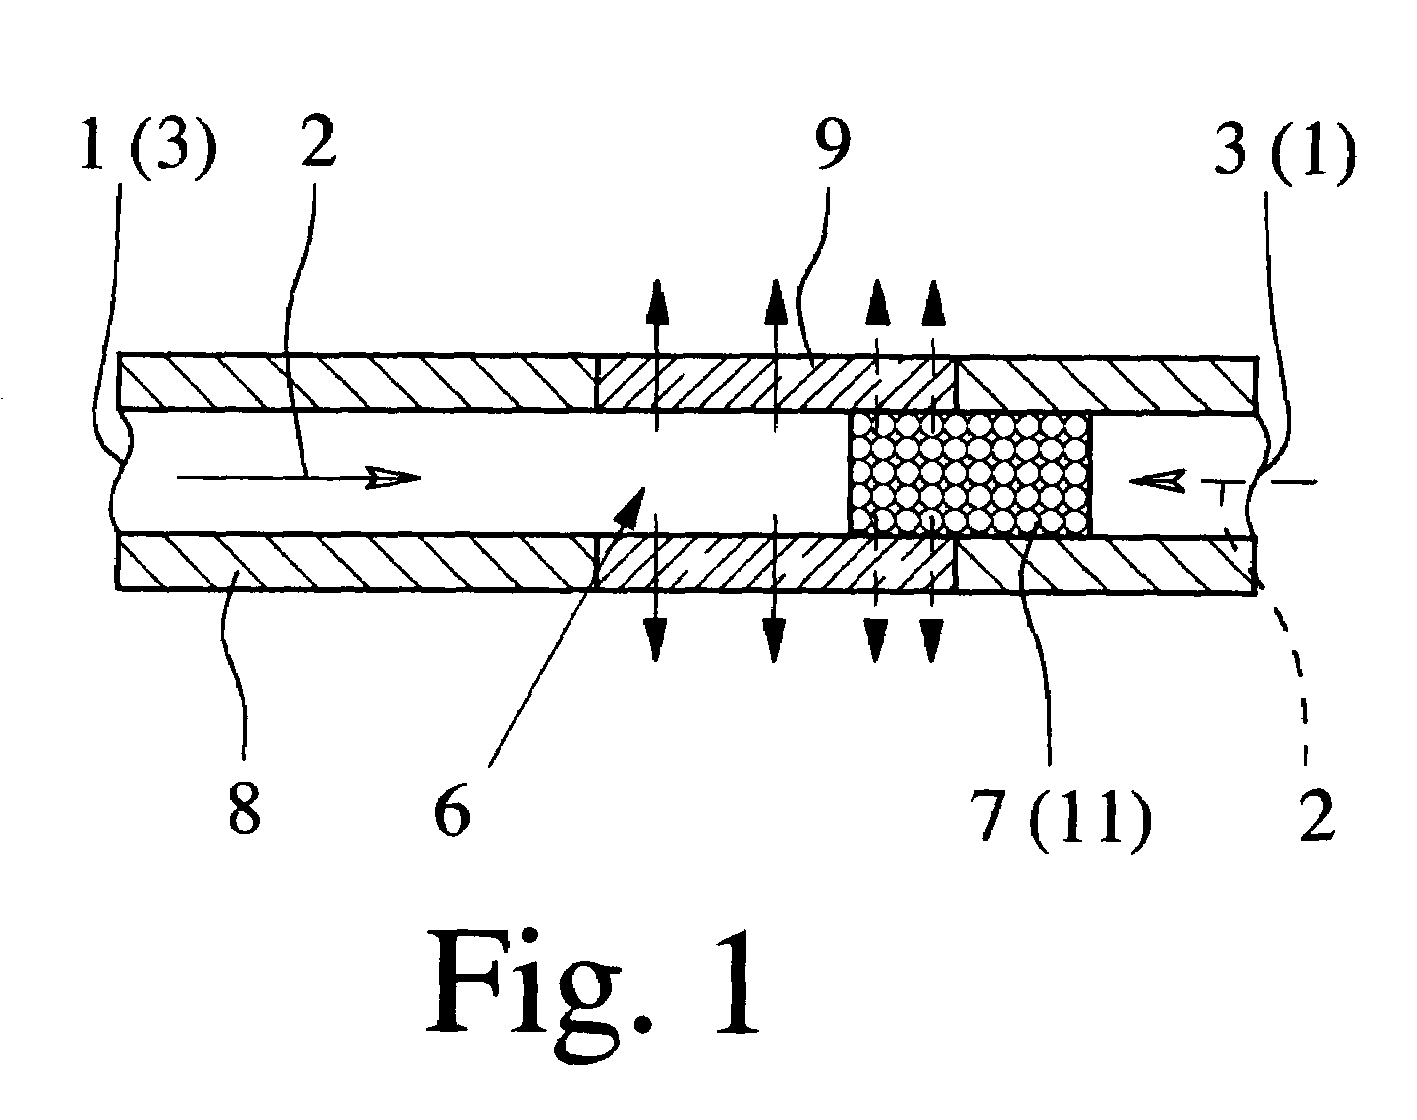 Process and device for separating and exhausting gas bubbles from liquids